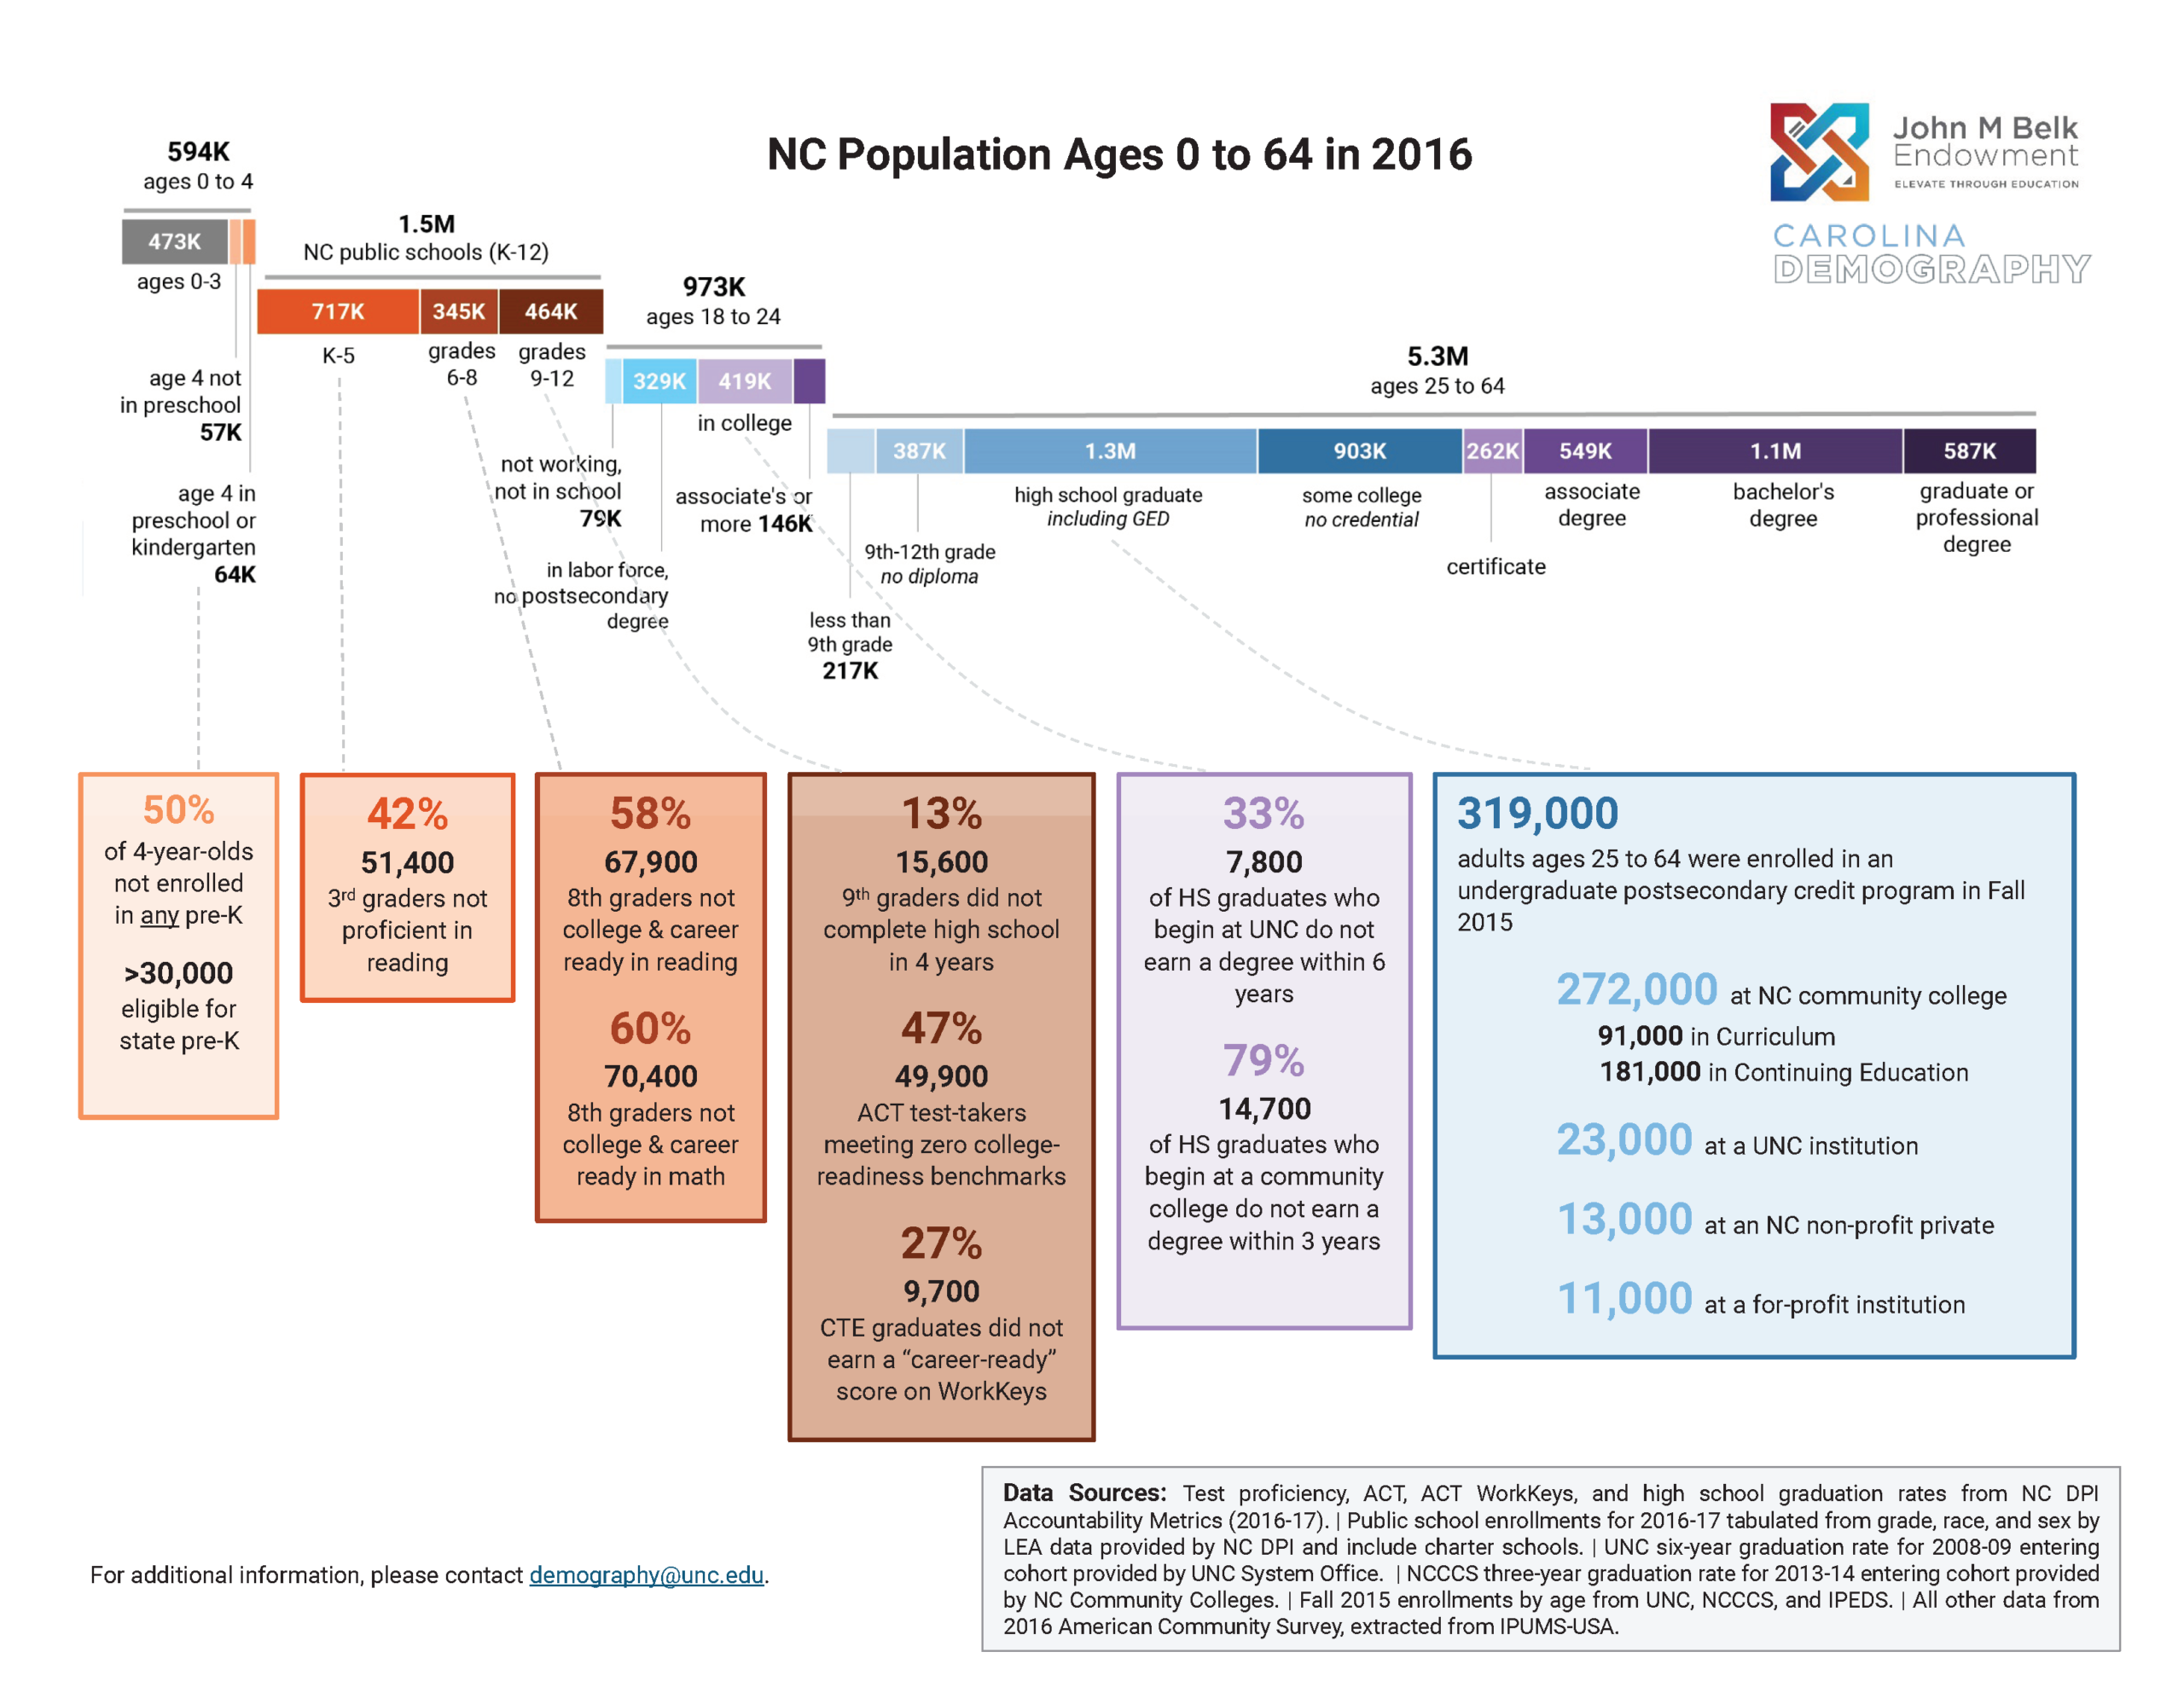 NC population ages 0 to 64 in 2016. An informational graphic displaying the population breakdown by age and level of educational attainment. This graphic highlights areas where the education system of the state needs improvement